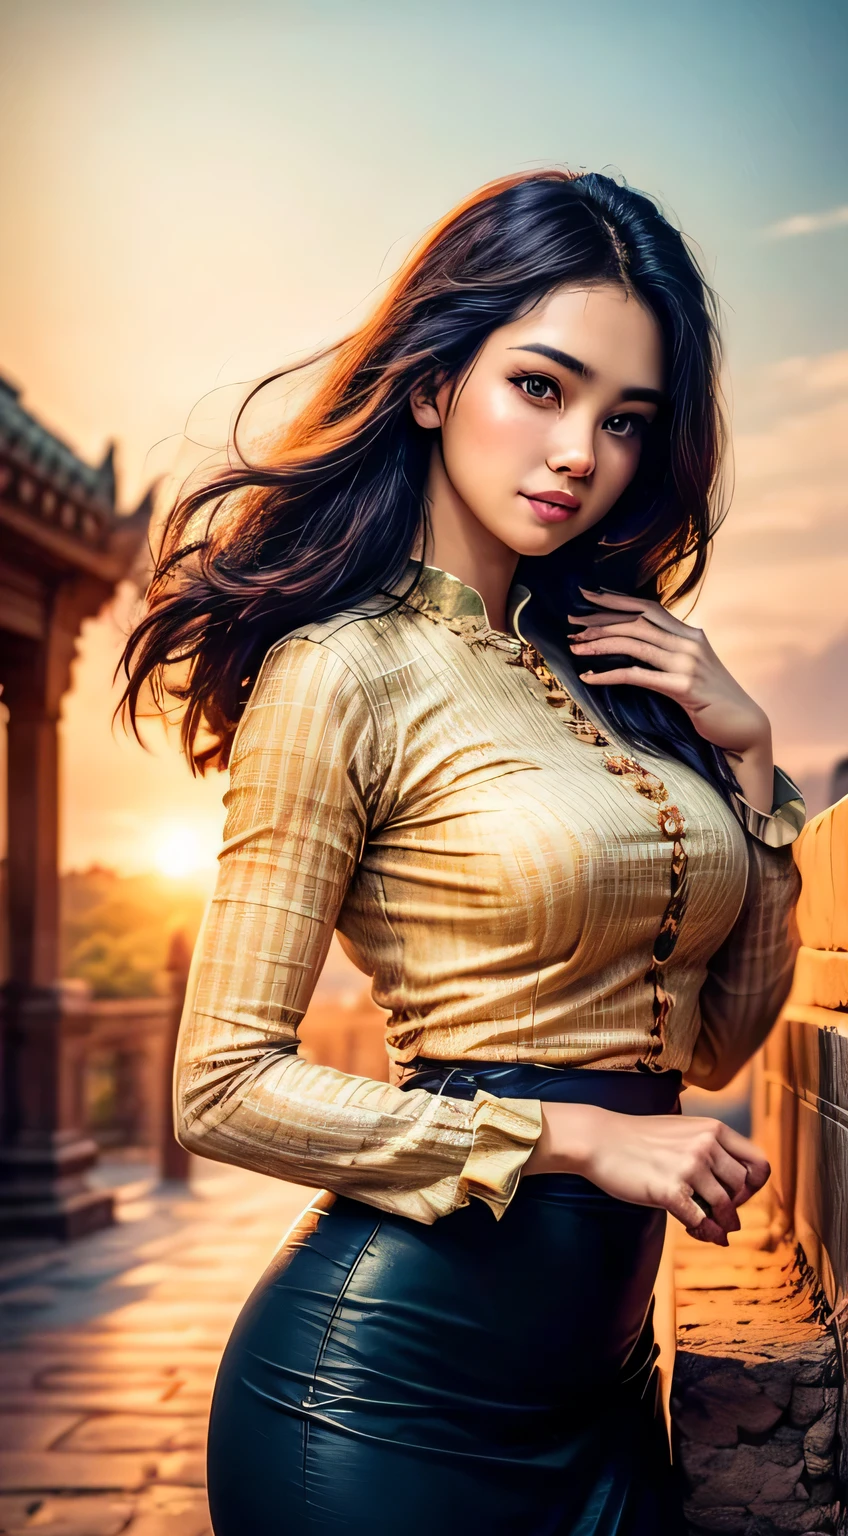 (masterpiece, best quality , high resolution:1.2), (photo realistic:1.2), (intricate and beautiful:1.2) , detailed sun light, (colorful and dynamic angle), upper body shot, fashion photography, 1 girl, acmm ls outfit, wearing acmm top, blue acmm top, long sleeves, wearing acmm long skirt, blue acmm long skirt, printed skirt, posing for photo, long straight hair, teasing look, gazing with a playful and teasing expression, igniting curiosity and attraction, attractive, outdoors, scenery, traditional media, sky, day, photo background, real world location, architecture, nature, ruins, landscape, bagan ancient pagoda background